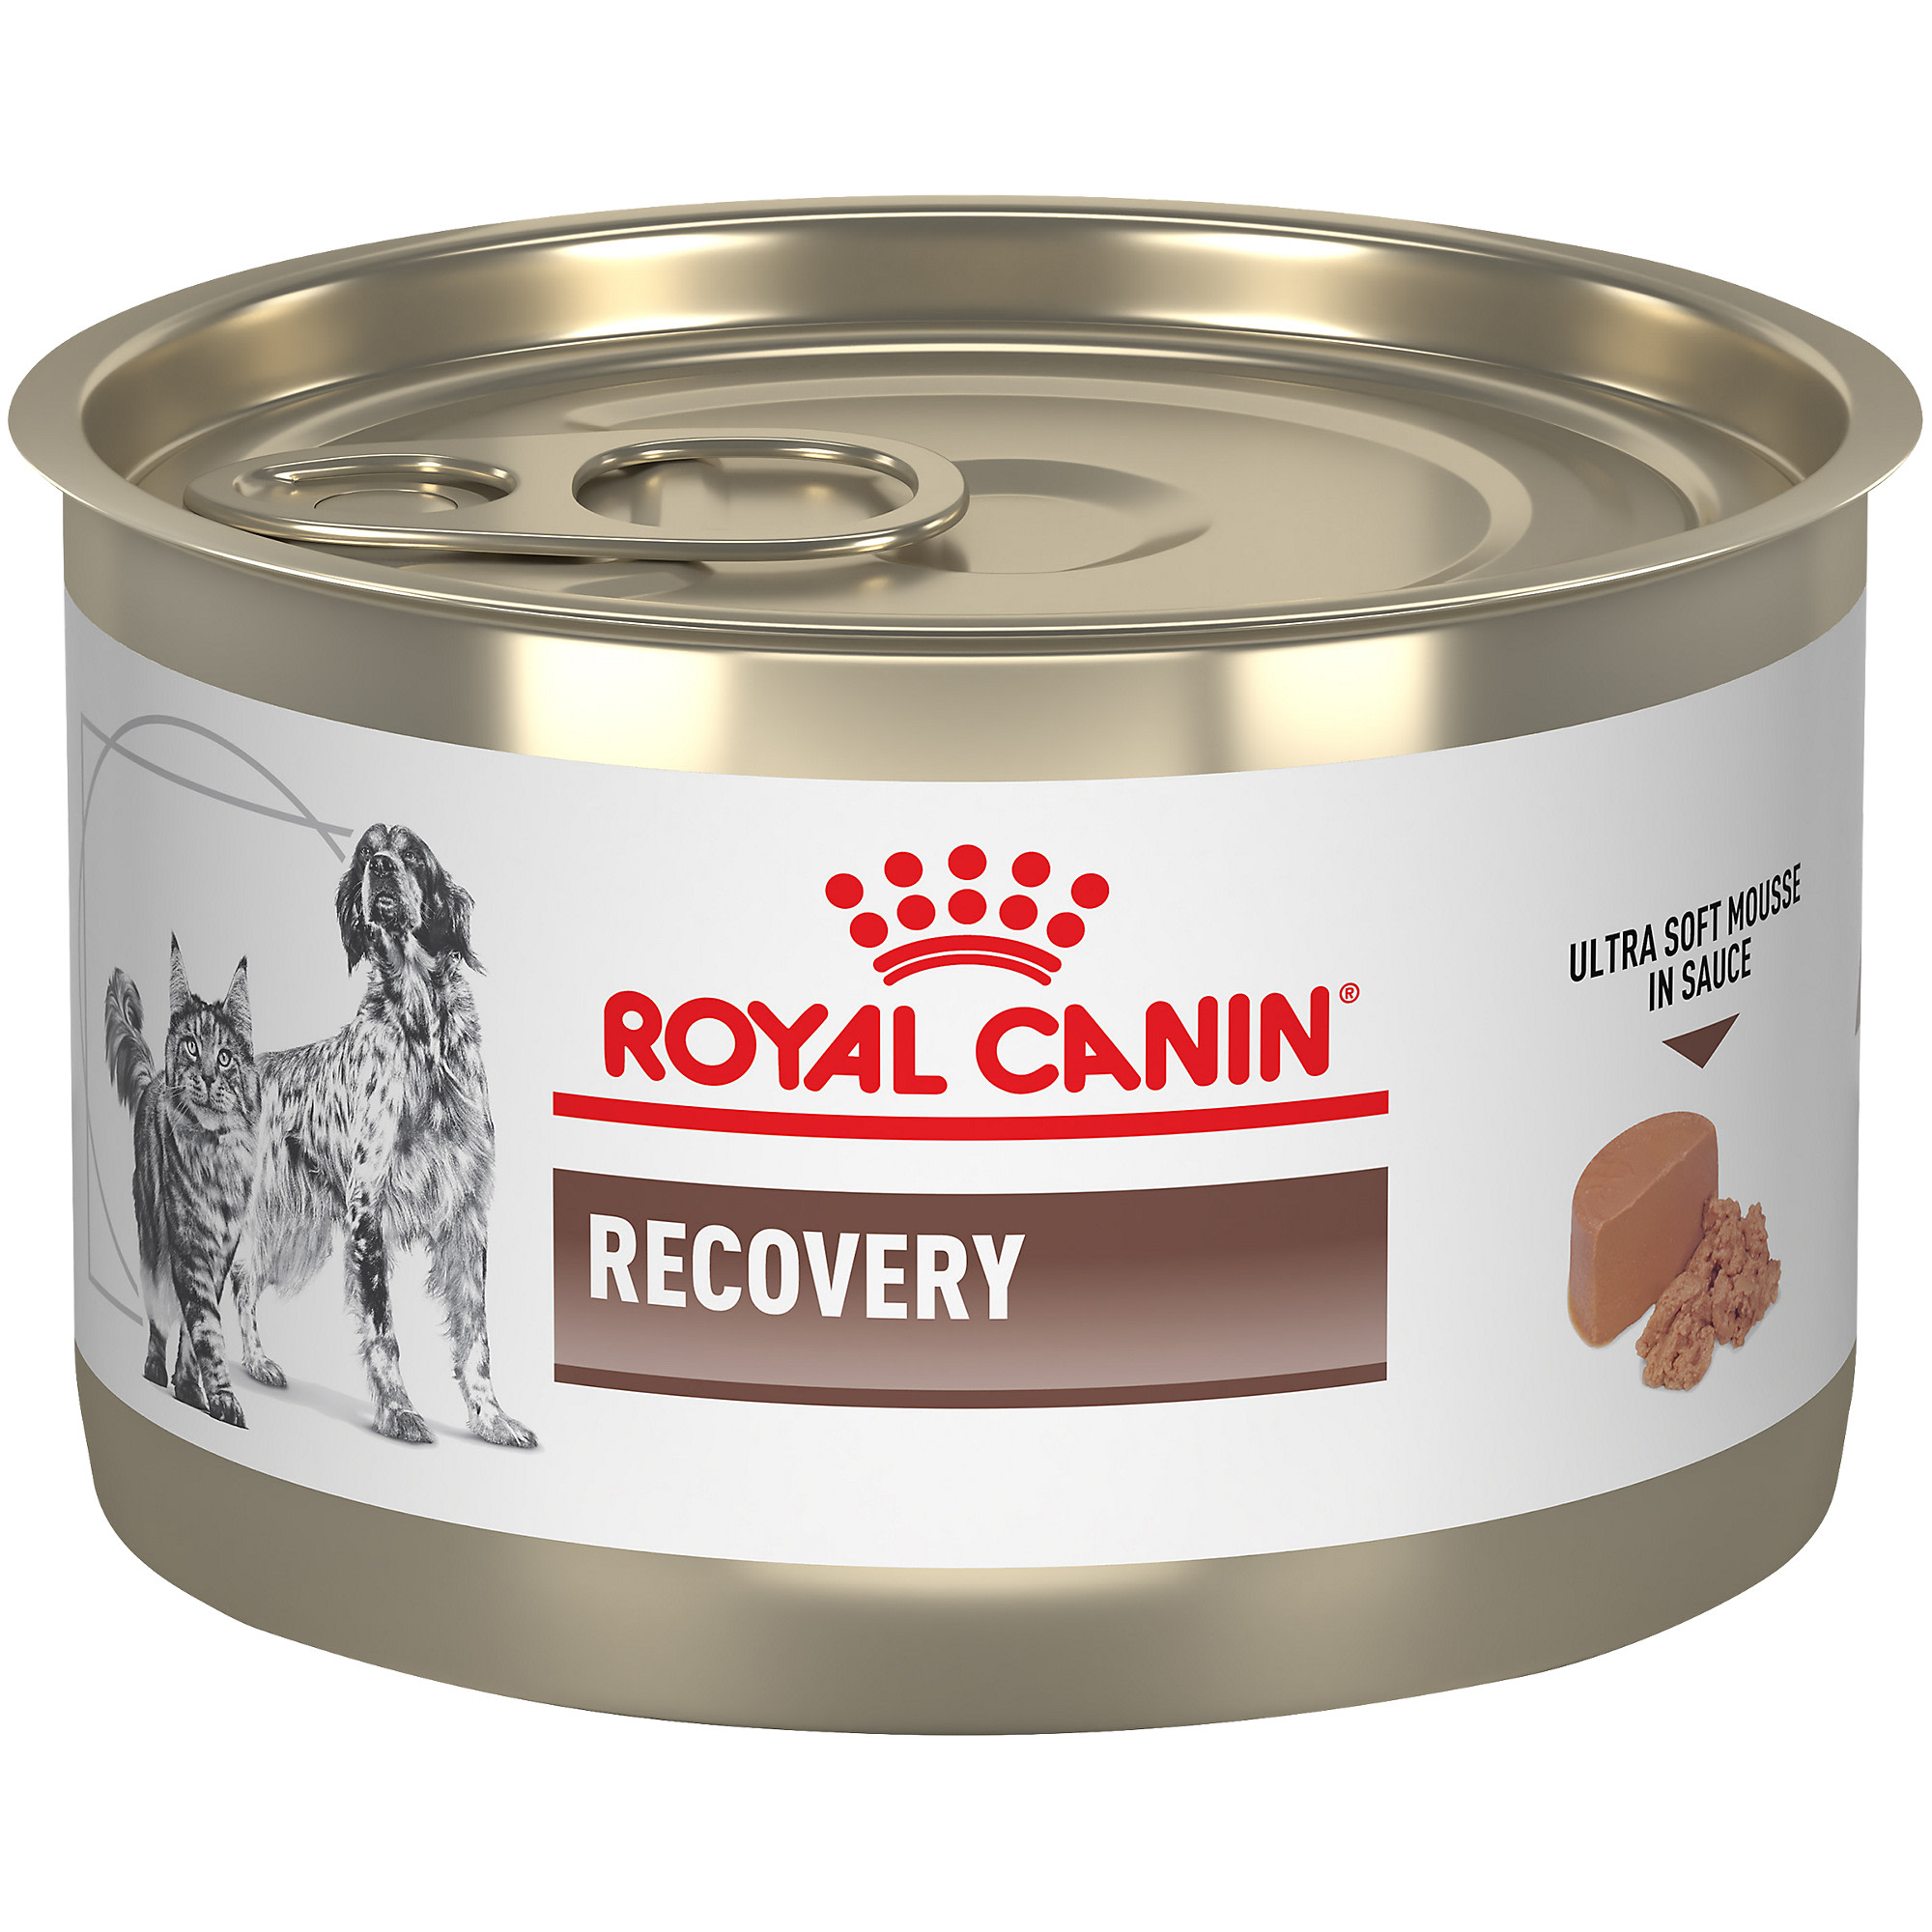 Royal Canin Recovery Cat Food: The Ultimate Buying Guide & Top 10 ...